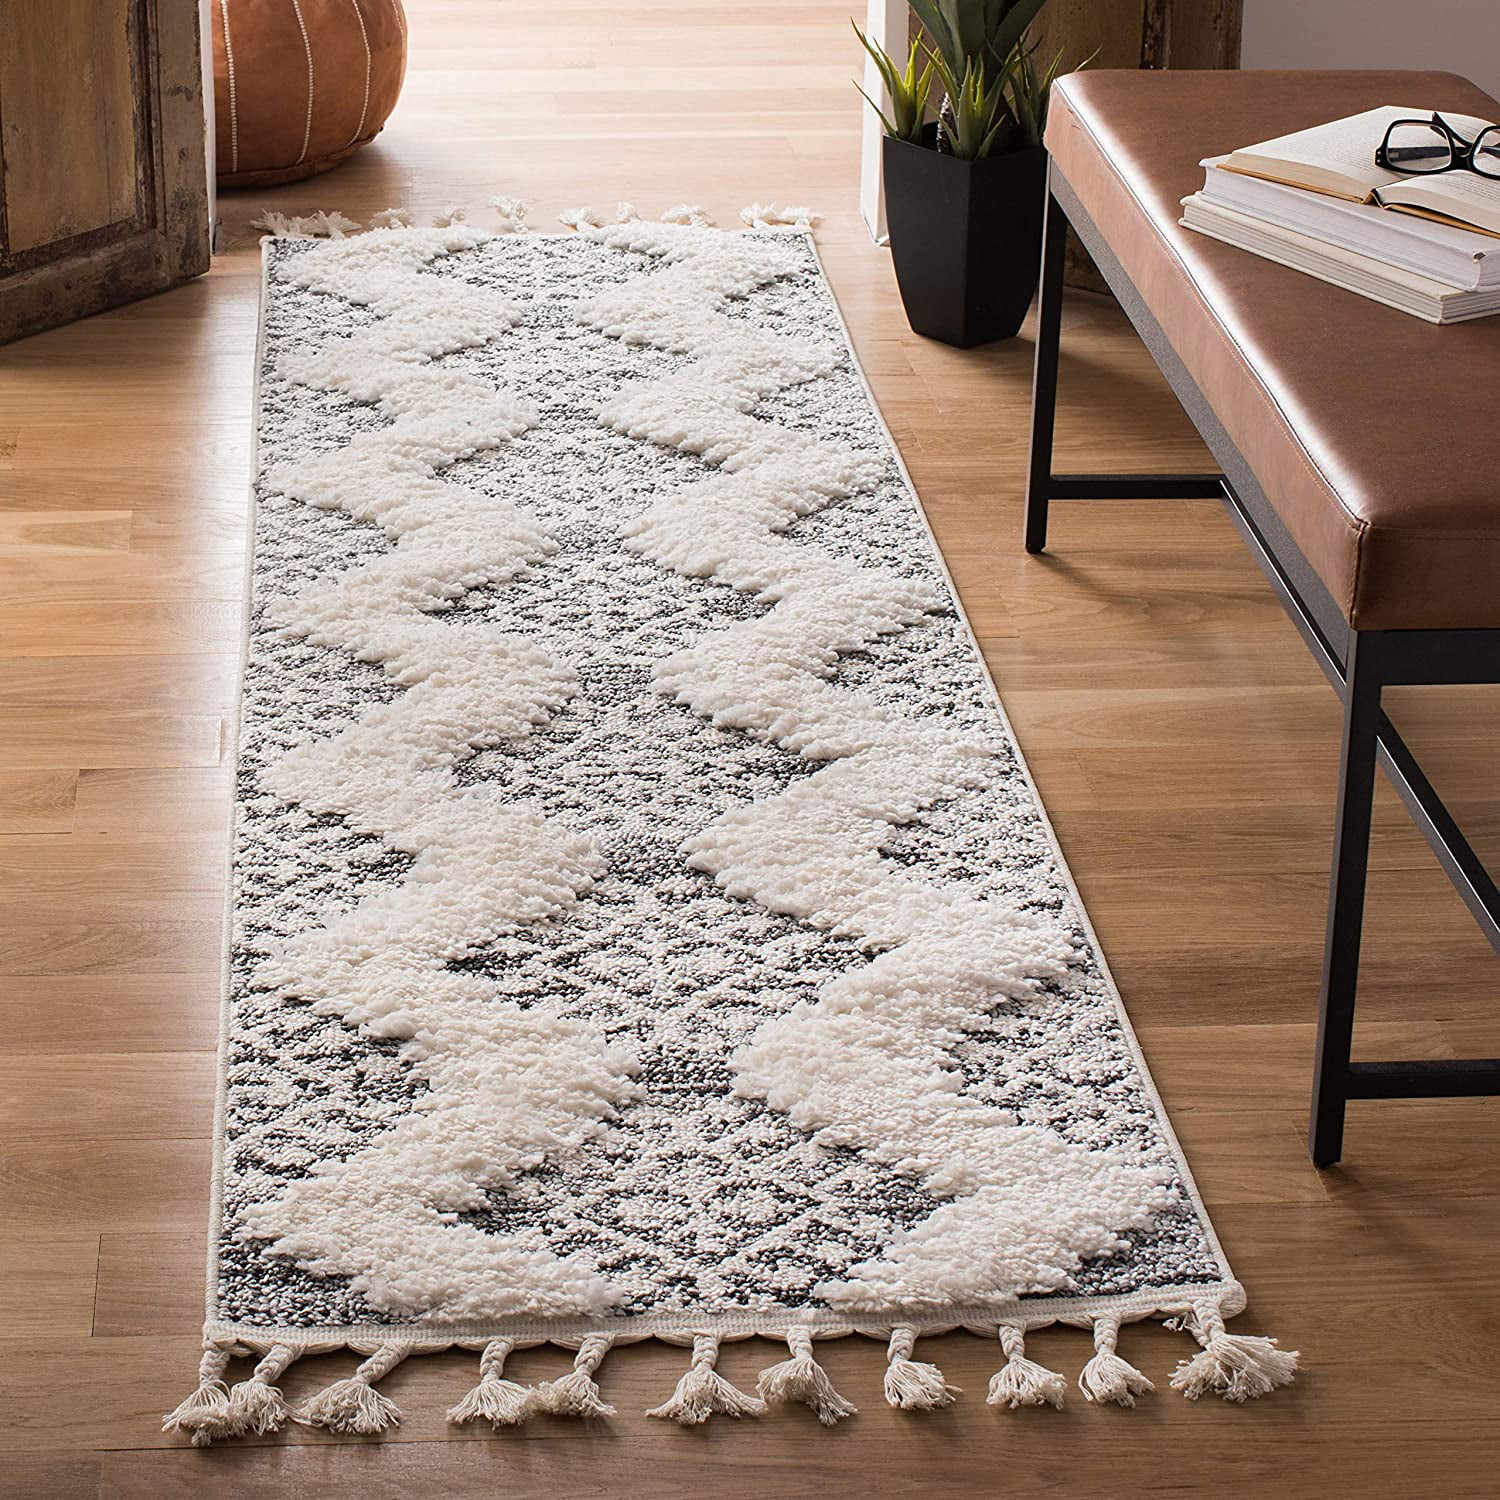 SAFAVIEH Moroccan Fringe Shag Collection MFG246B Boho Tribal Non-Shedding Living Room Bedroom Dining Room Entryway Plush 2-inch Thick Accent Rug 2'3 x 5' Cream Charcoal 